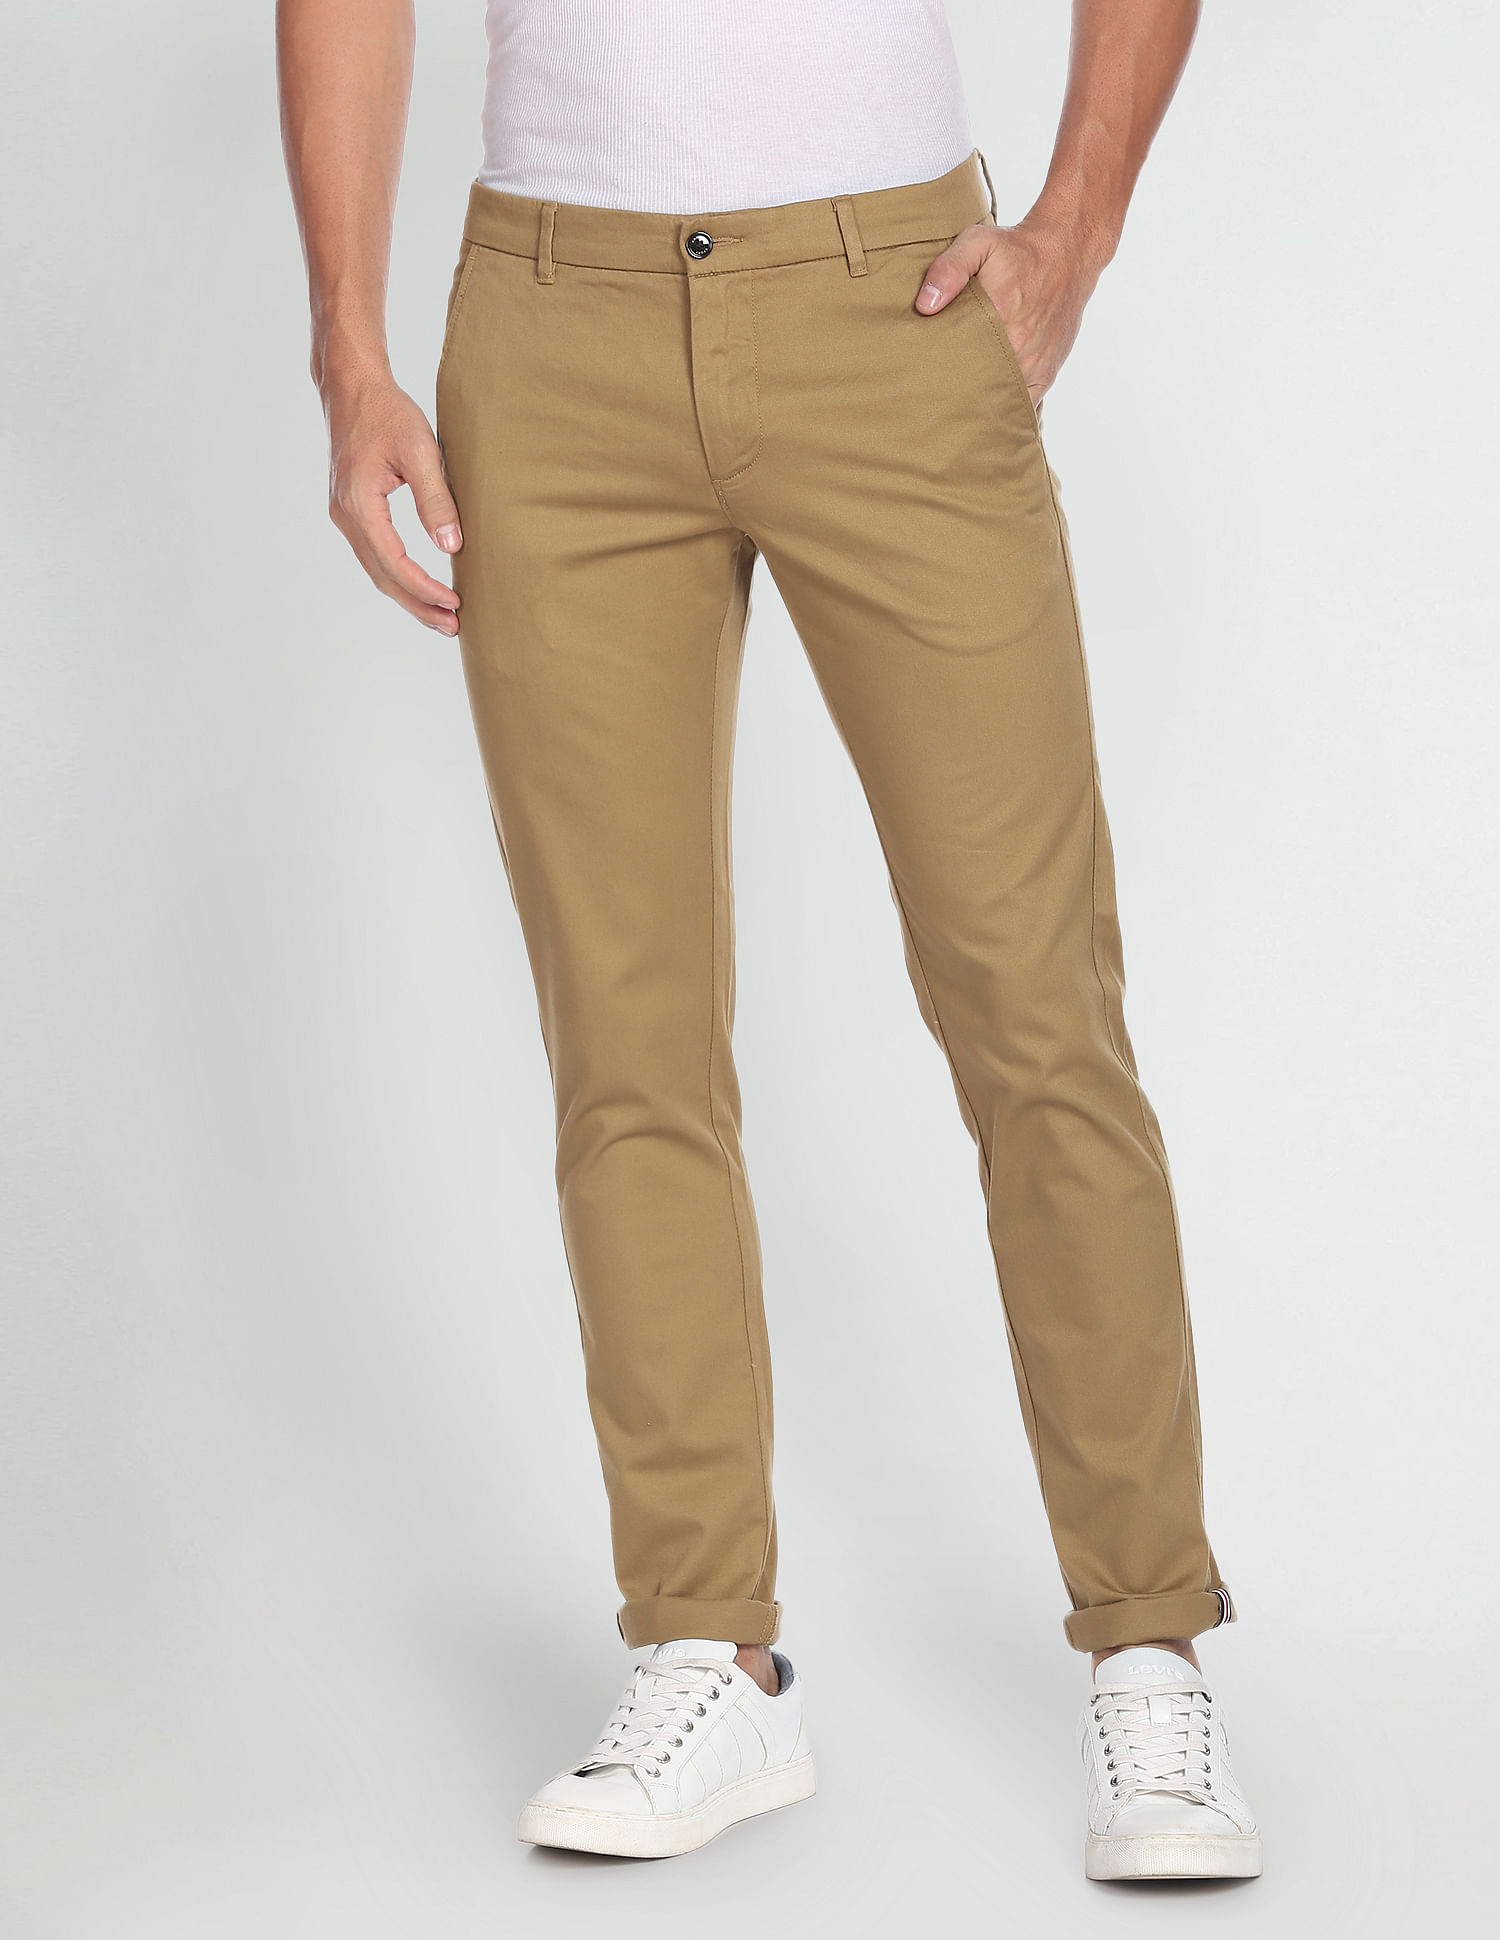 Buy Arrow Sport Khaki Regular Fit Trousers from top Brands at Best Prices  Online in India  Tata CLiQ